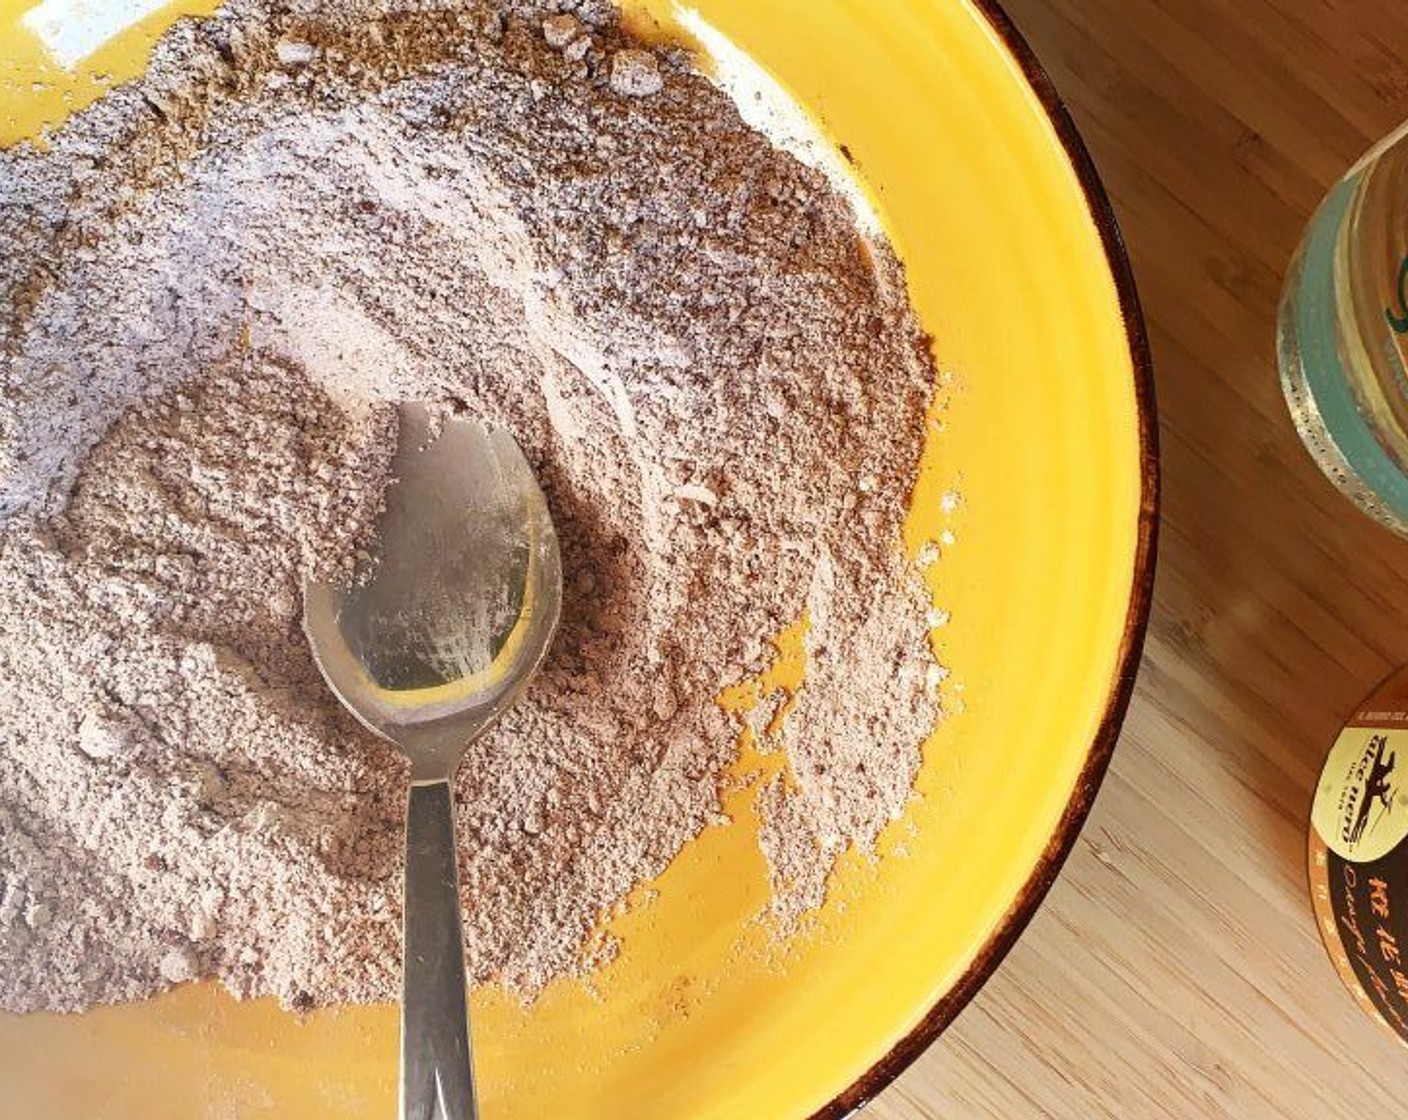 step 2 In a large bowl, mix together the Gluten-Free Oat Flour (1/2 cup), Rice Flour (1/4 cup), Almond Flour (2 Tbsp), Dark Cocoa Powder (2 Tbsp), Salt (1/4 tsp), and Baking Powder (1/2 tsp).